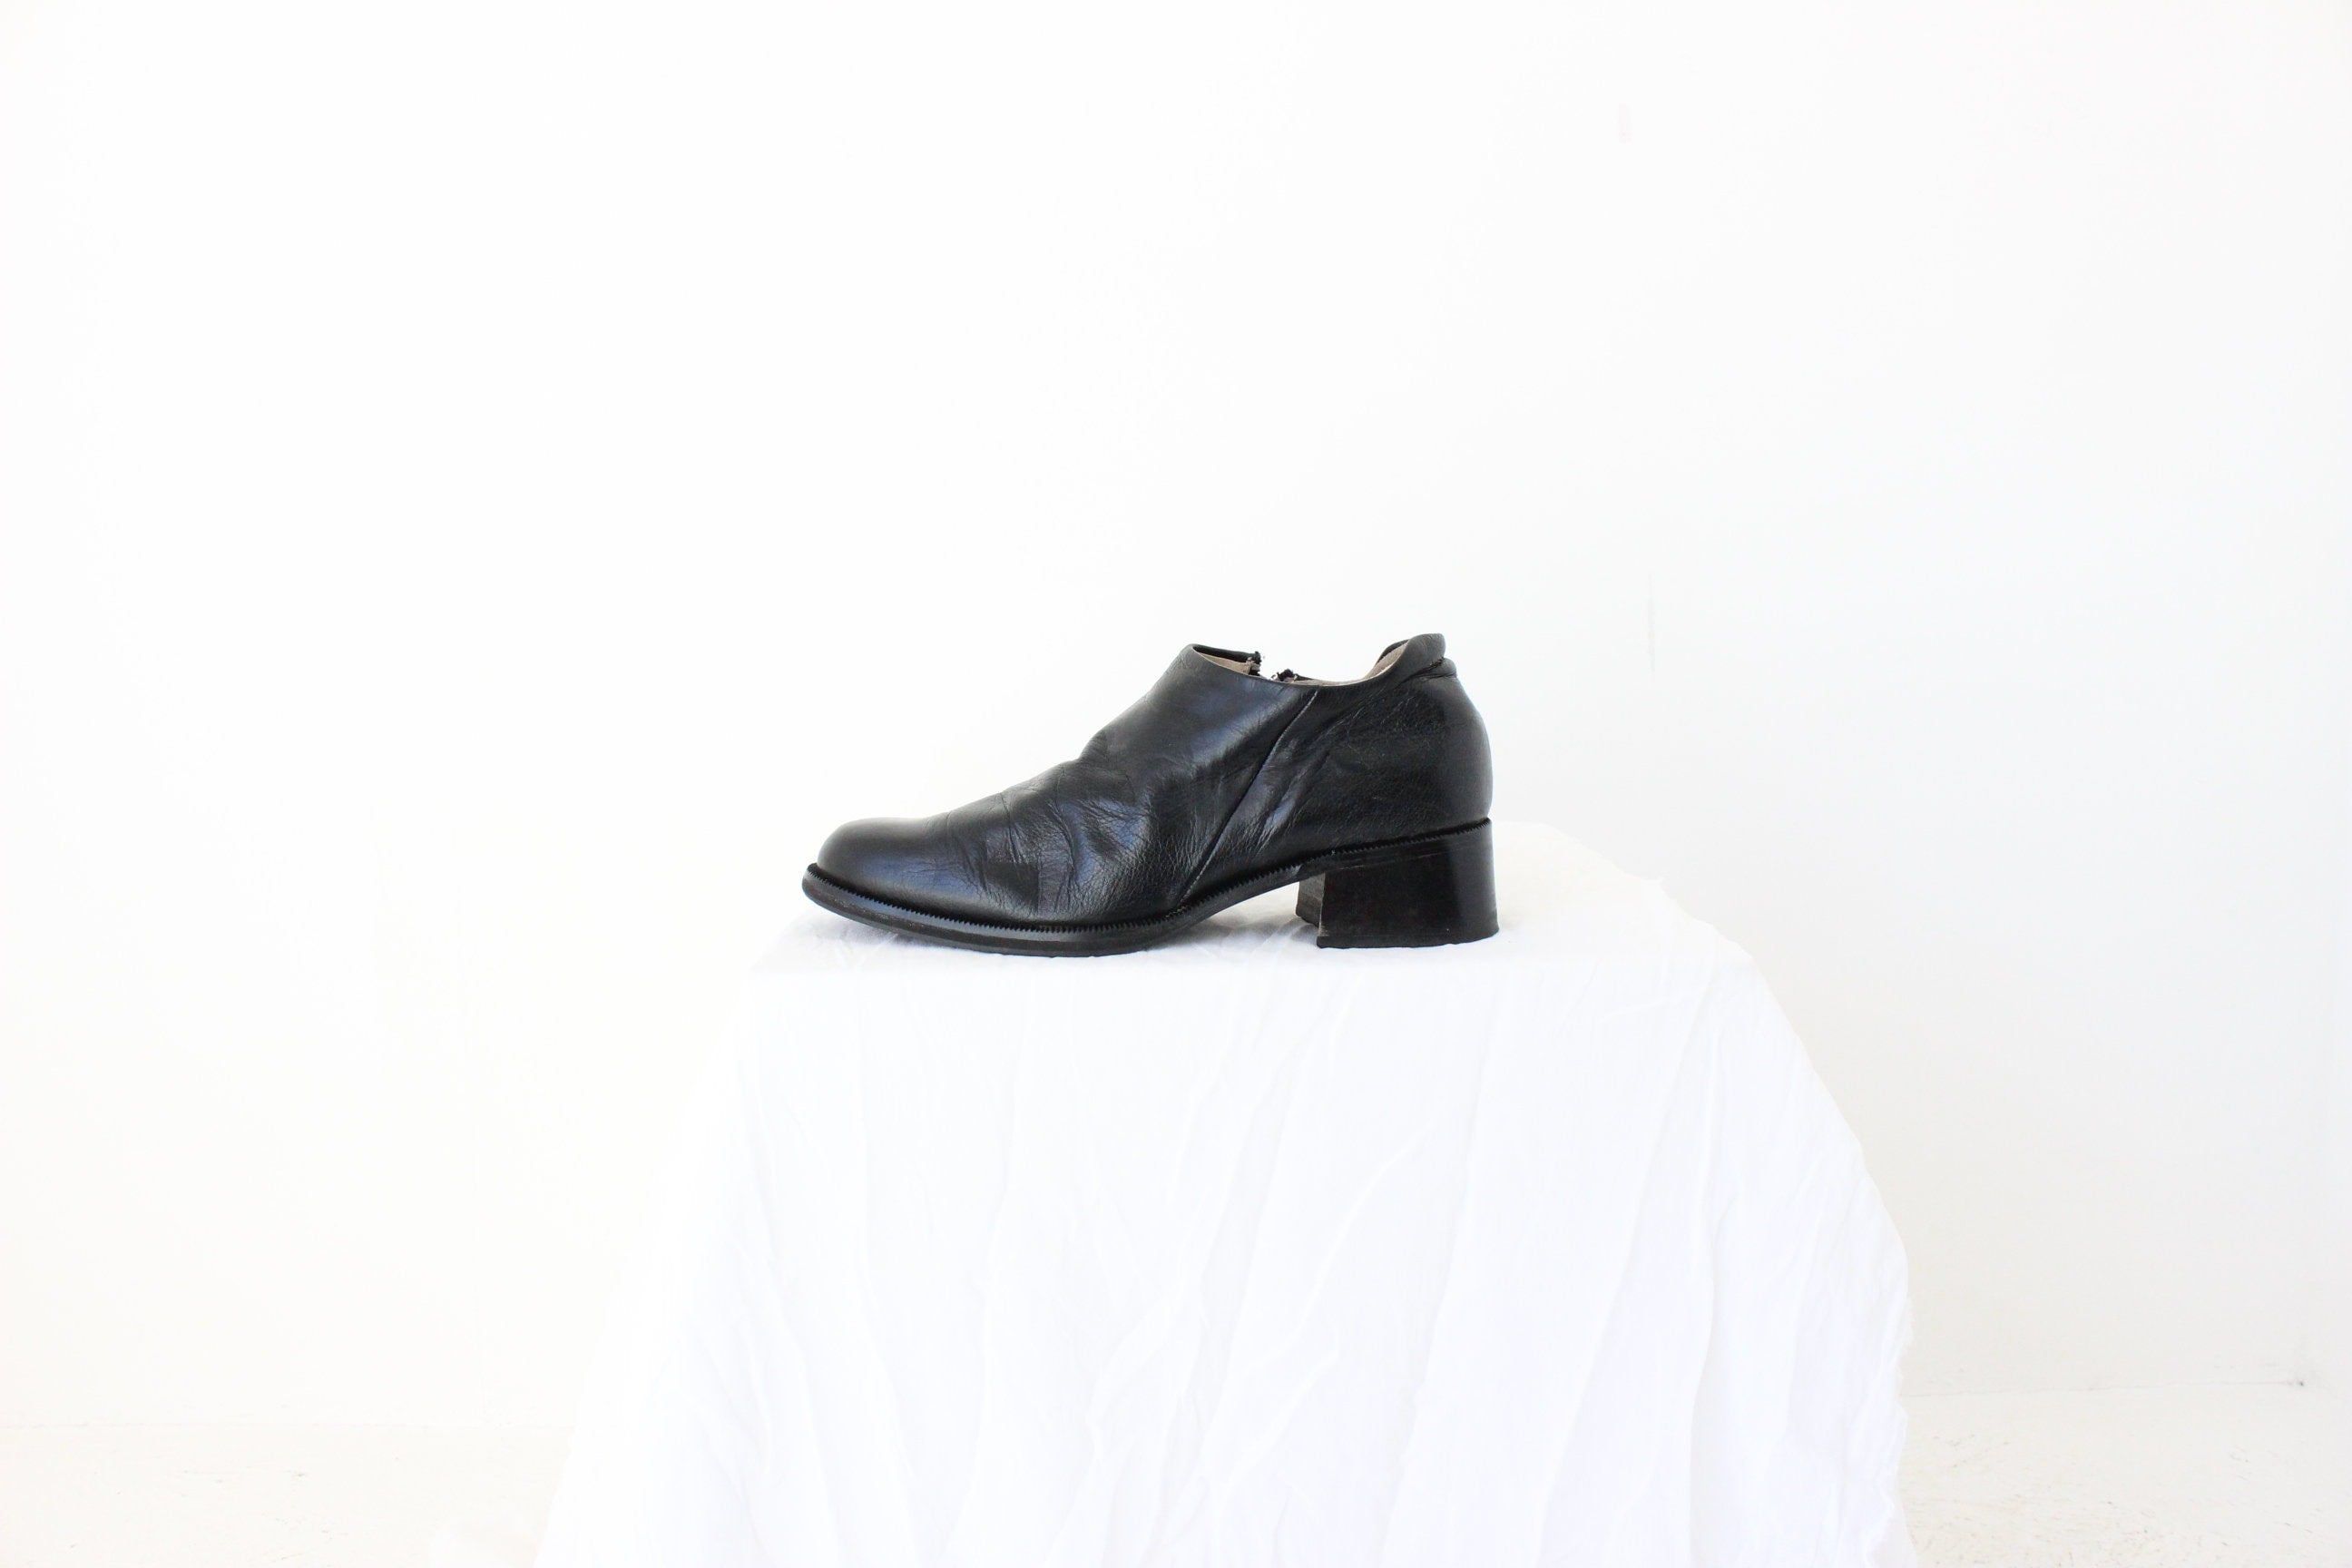 90s Leather New Zealand Made Minimal Boot / Loafer / Brogue Hybrid - Euro 38